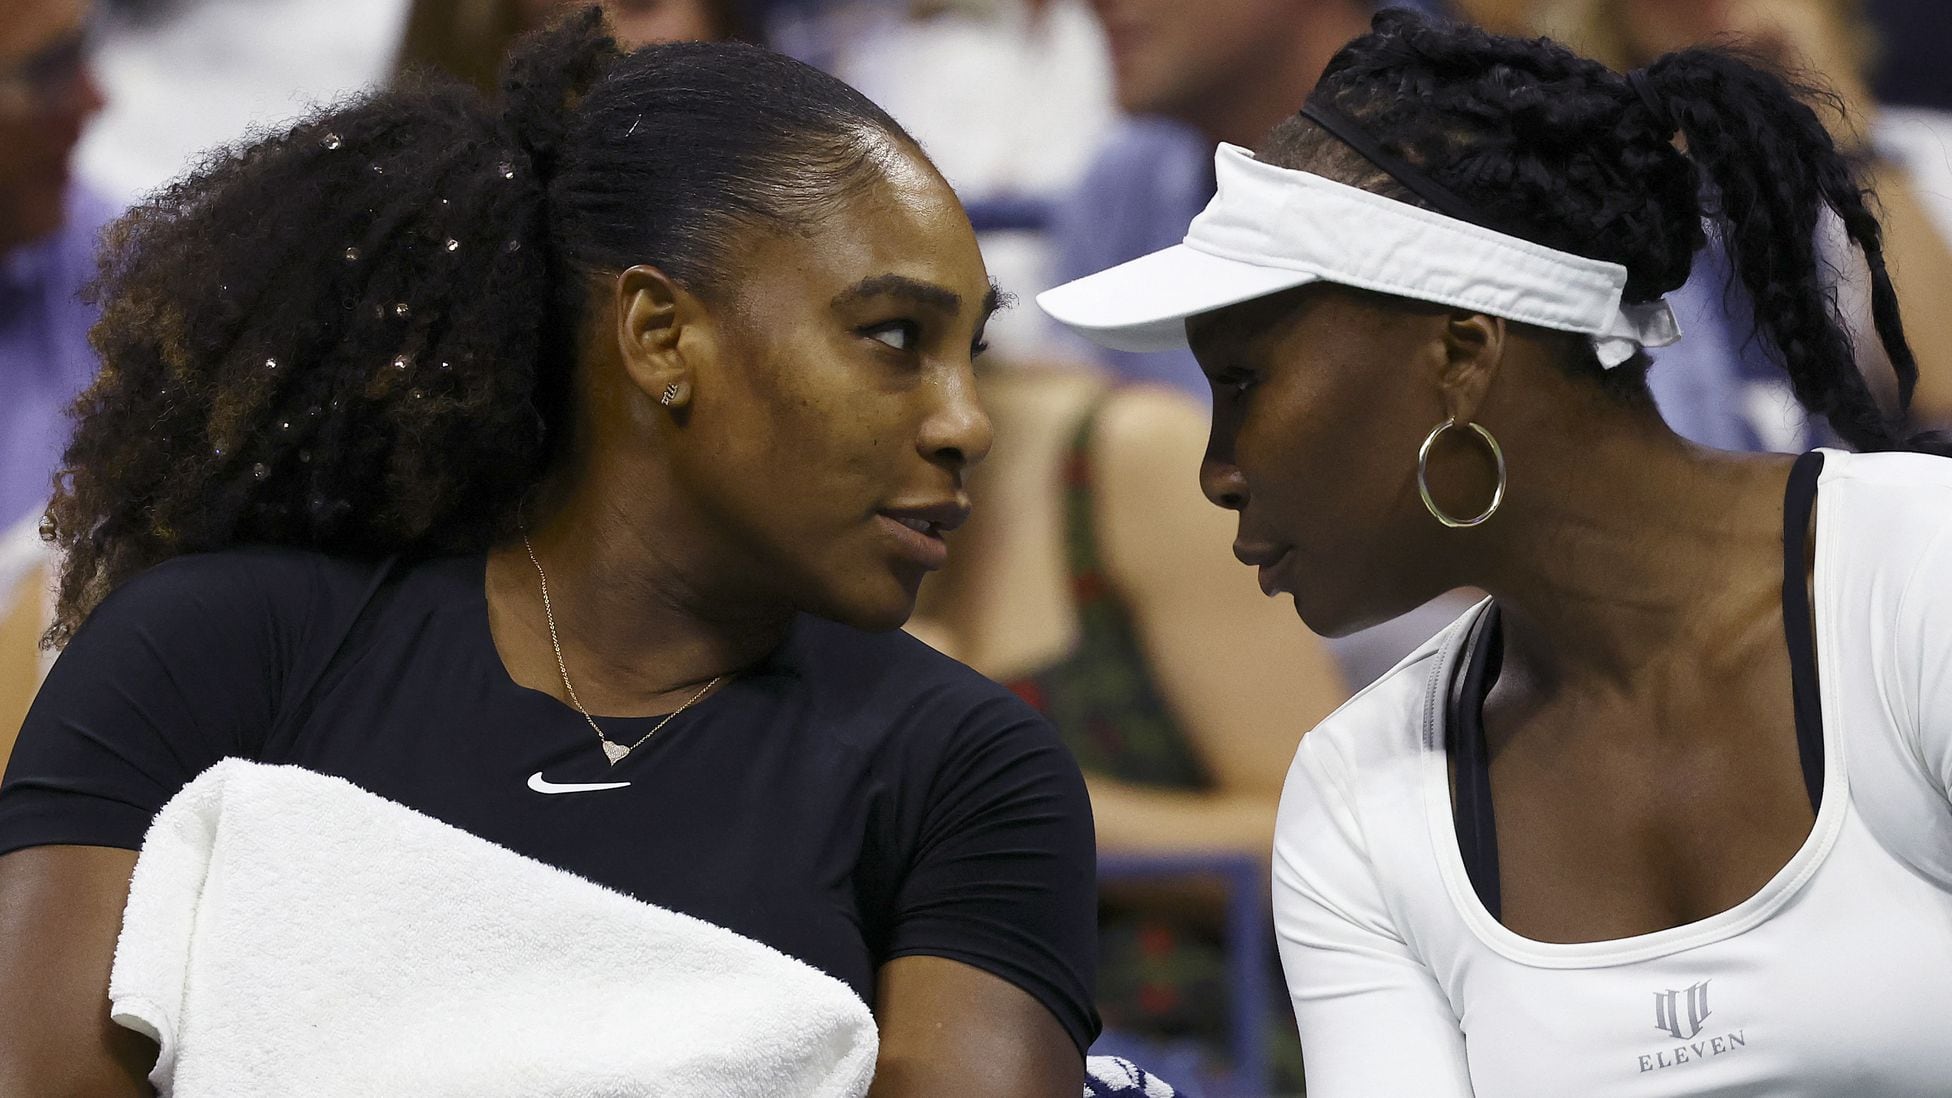 How Much Is Venus Williams Net Worth In Comparison To Serenas' In 2022?